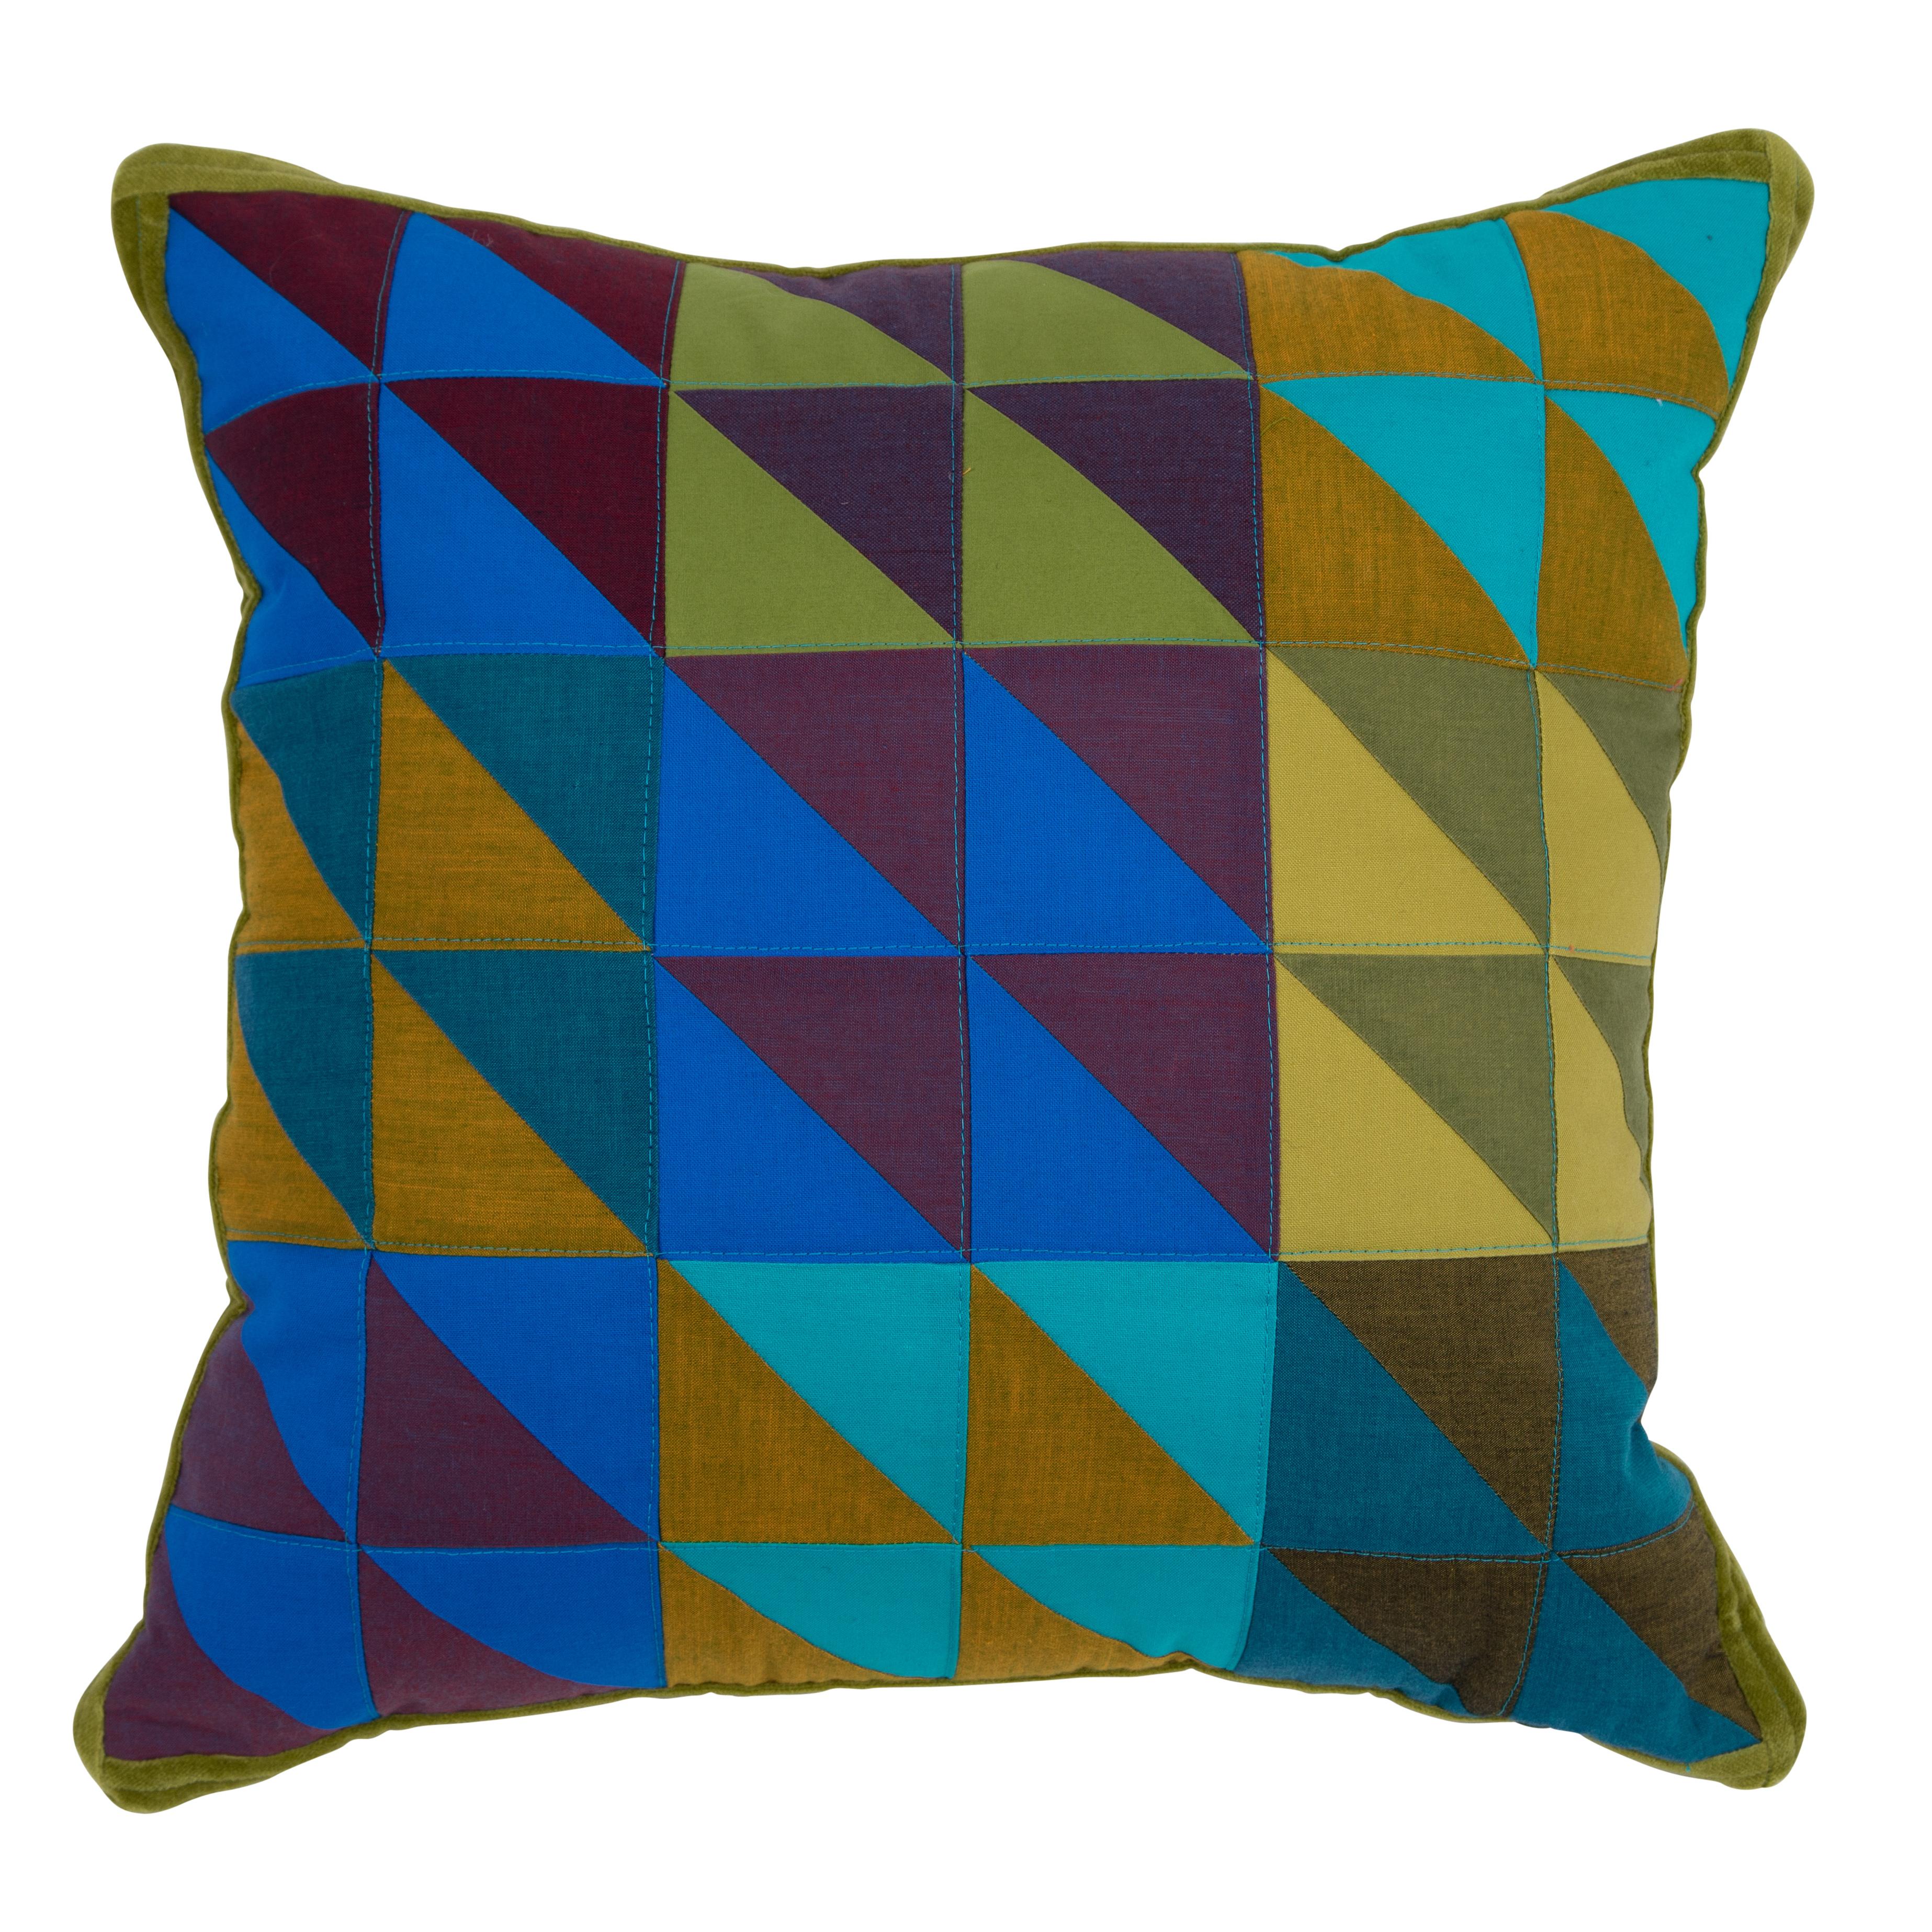 One-of-a-Kind Square Quilted Pillow in Green, Blue and Lavender Cotton For Sale